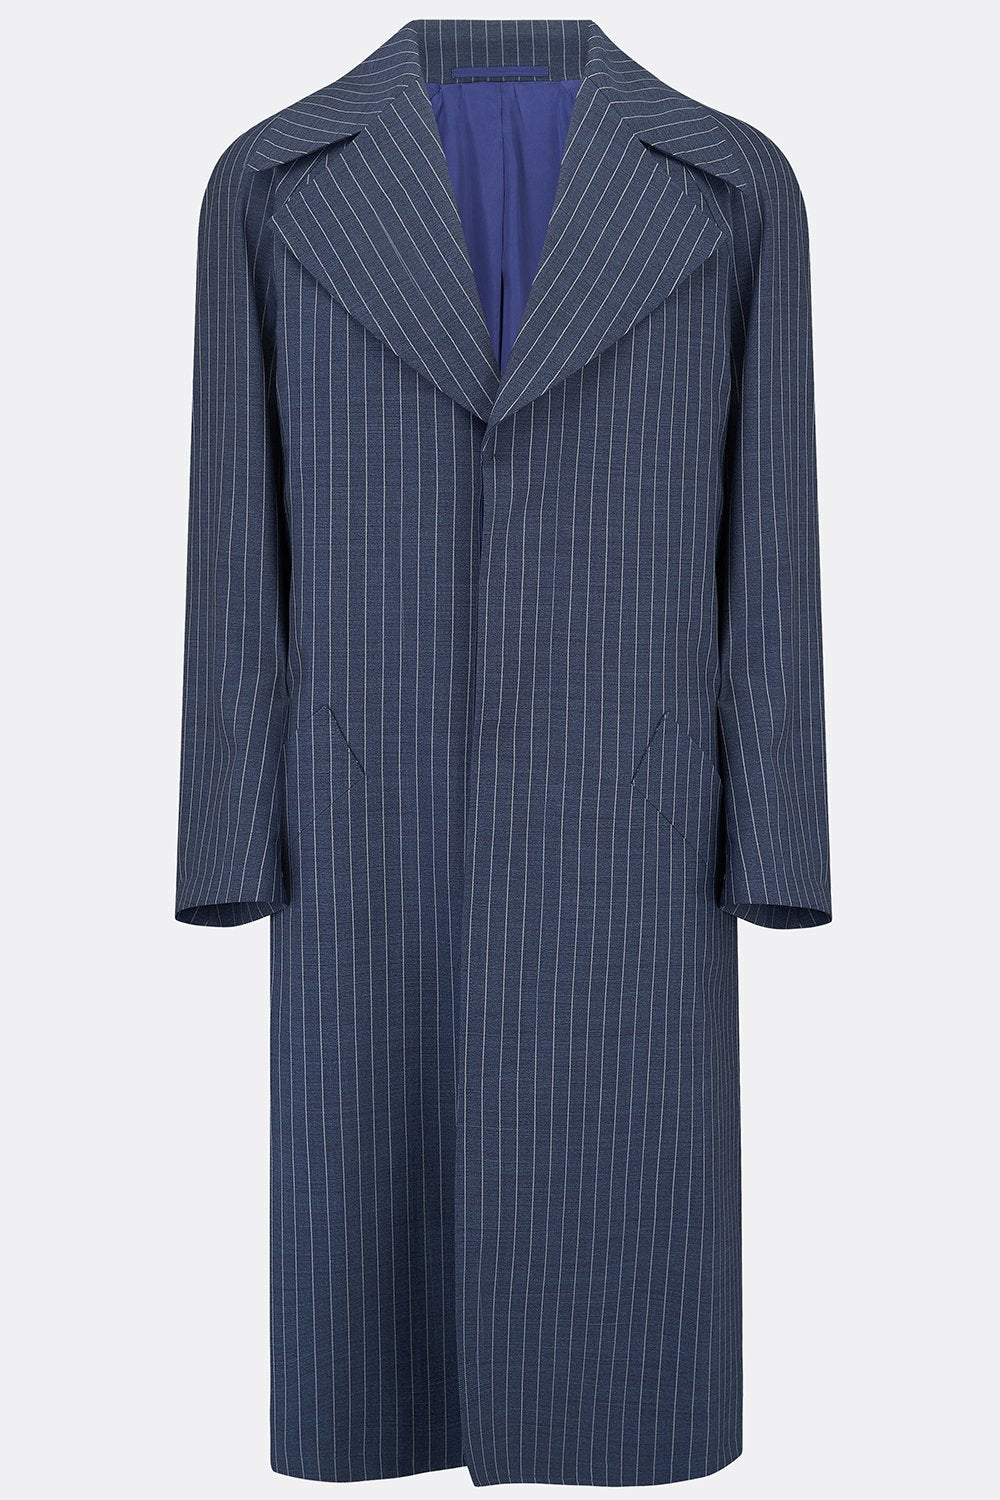 CAGNEY COAT IN BLUE STRIPE-menswear-A Child Of The Jago